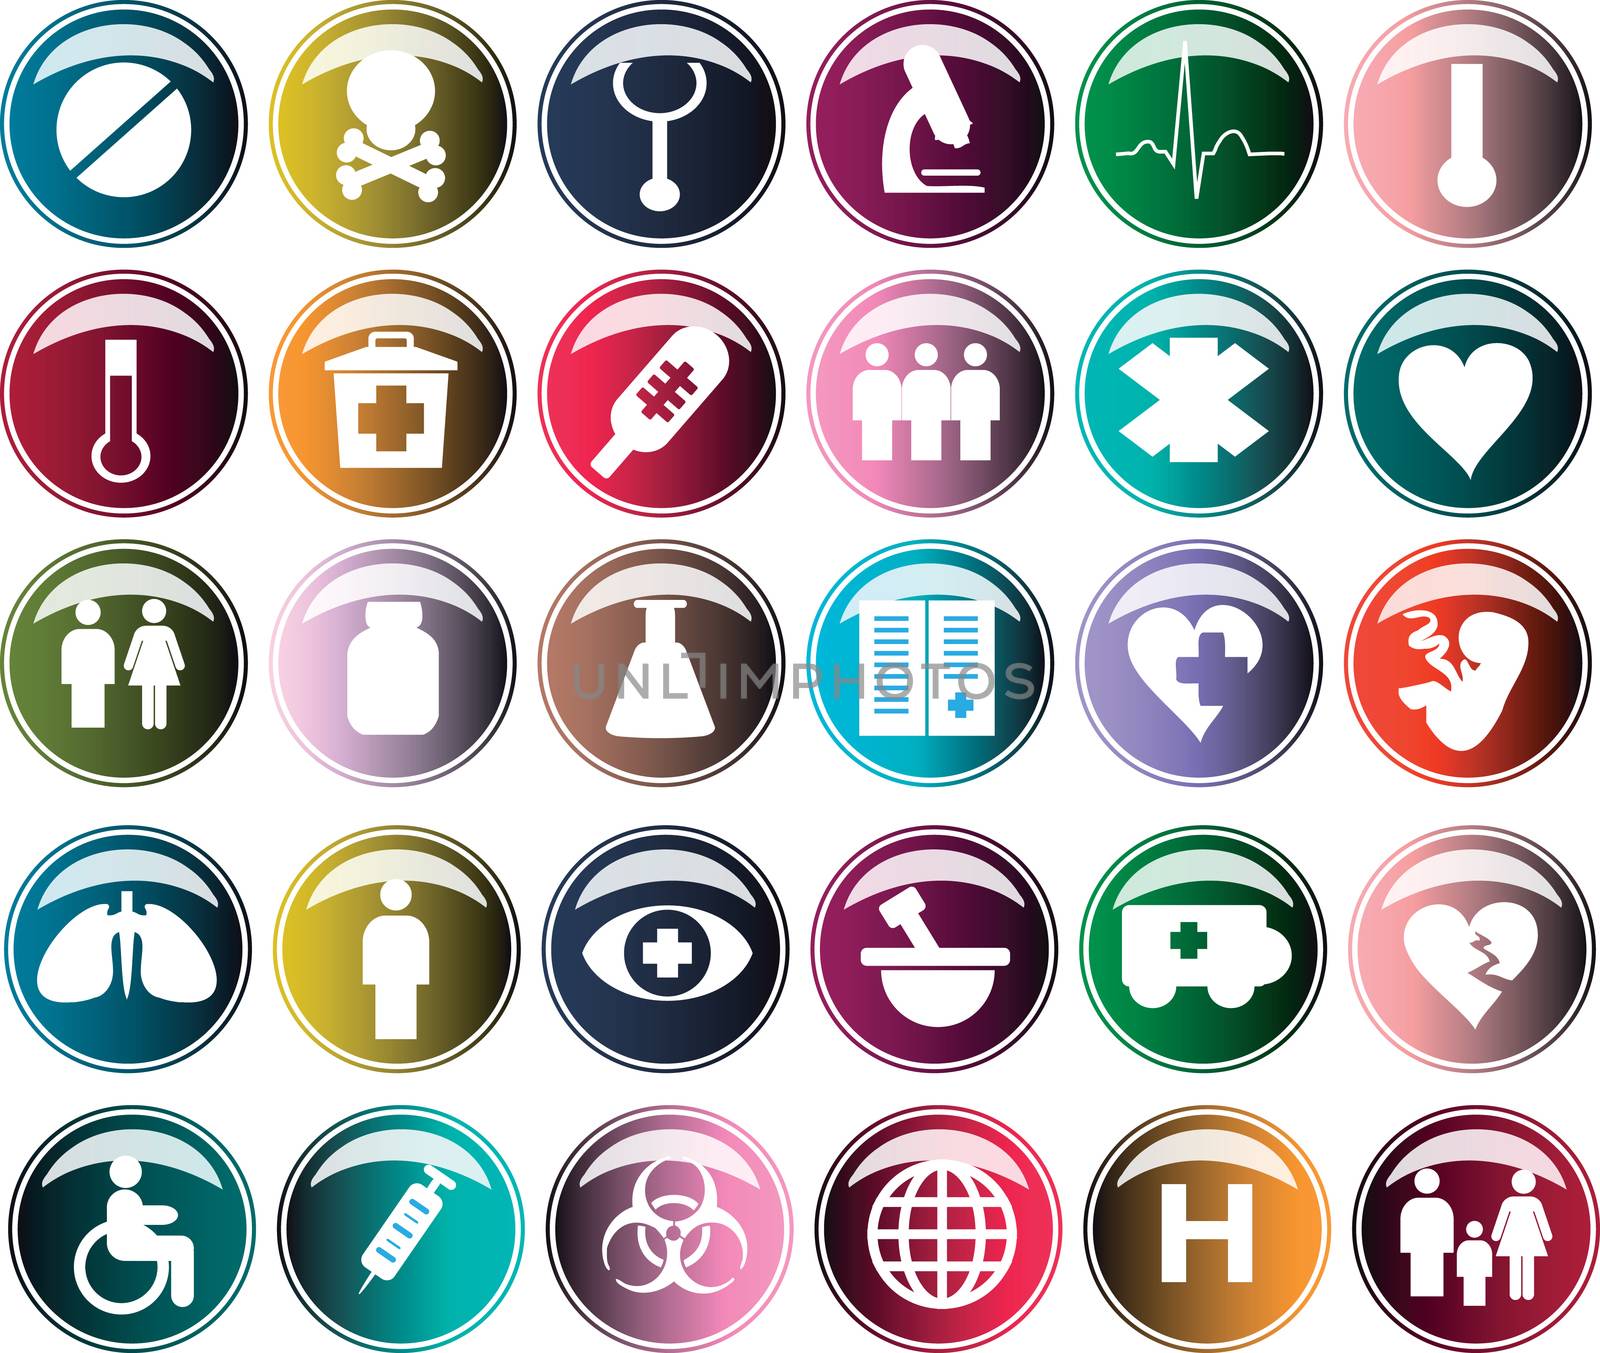 Medical button, shiny icons & warning-signs set 2